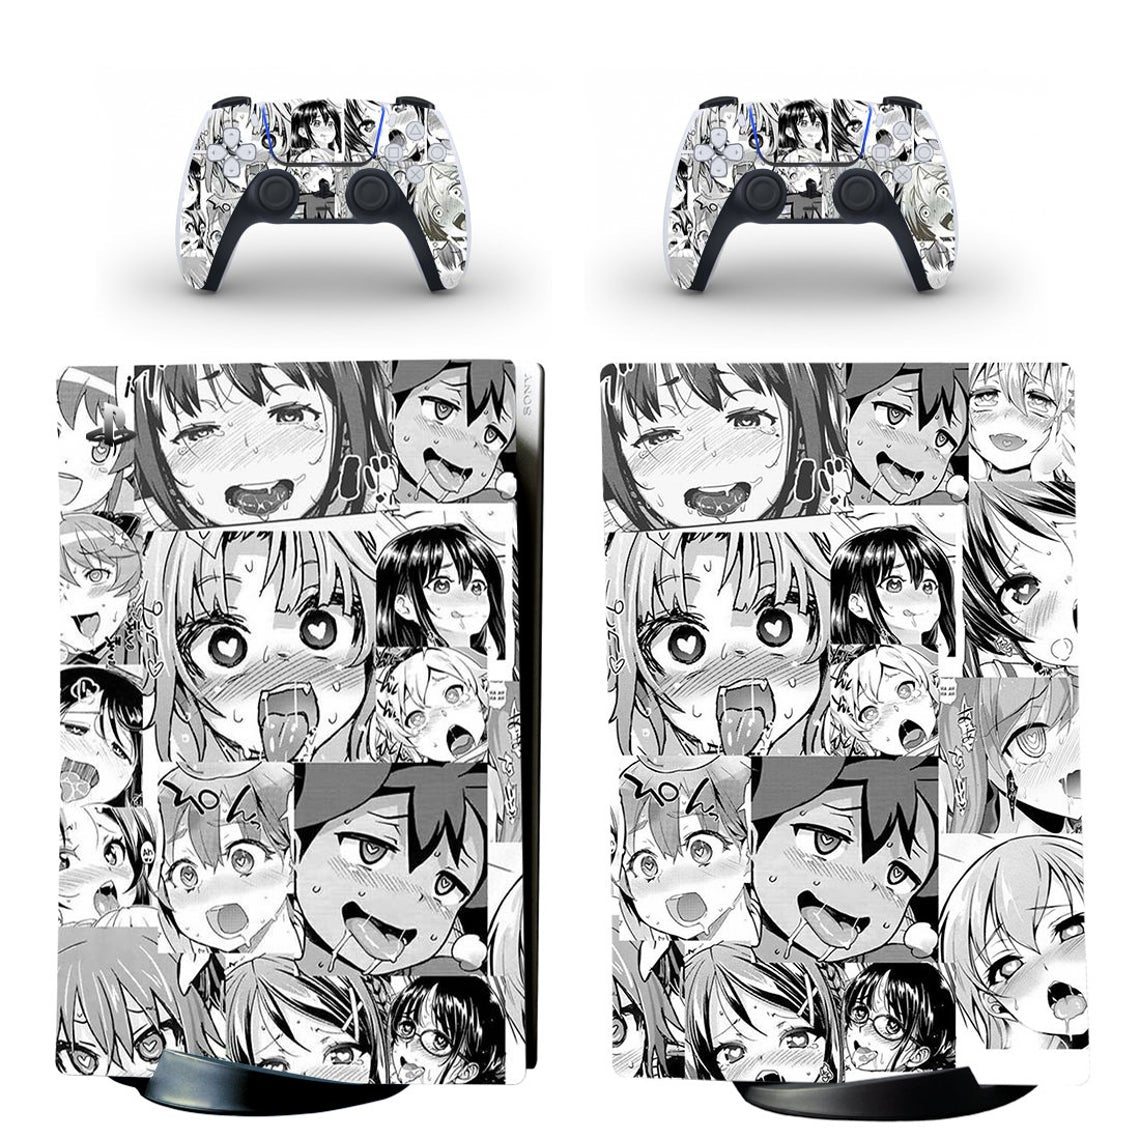 Skin for PS5 Digital Edition Anime Console and Controller Accessories Cover  Skins Wraps Fan Art Design for Playstation 5 Digital Edition  Amazonin  Video Games